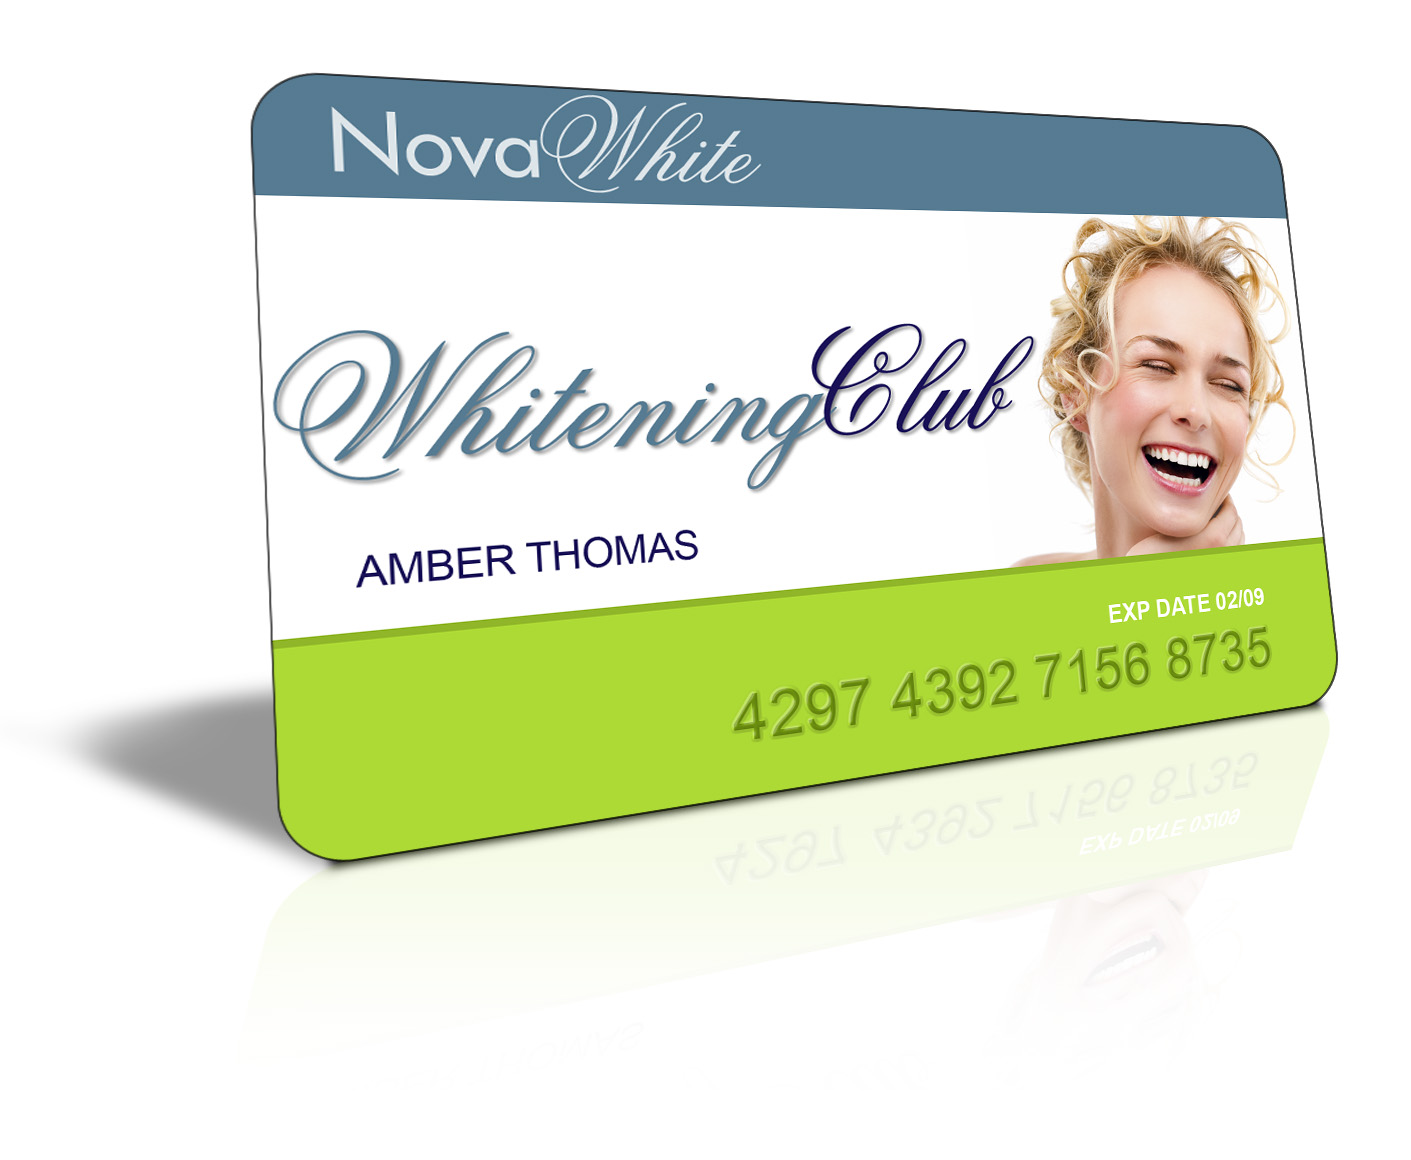 NovaWhite's Tooth Whitening Gel Discount Keeps Your Smile Looking Dazzling